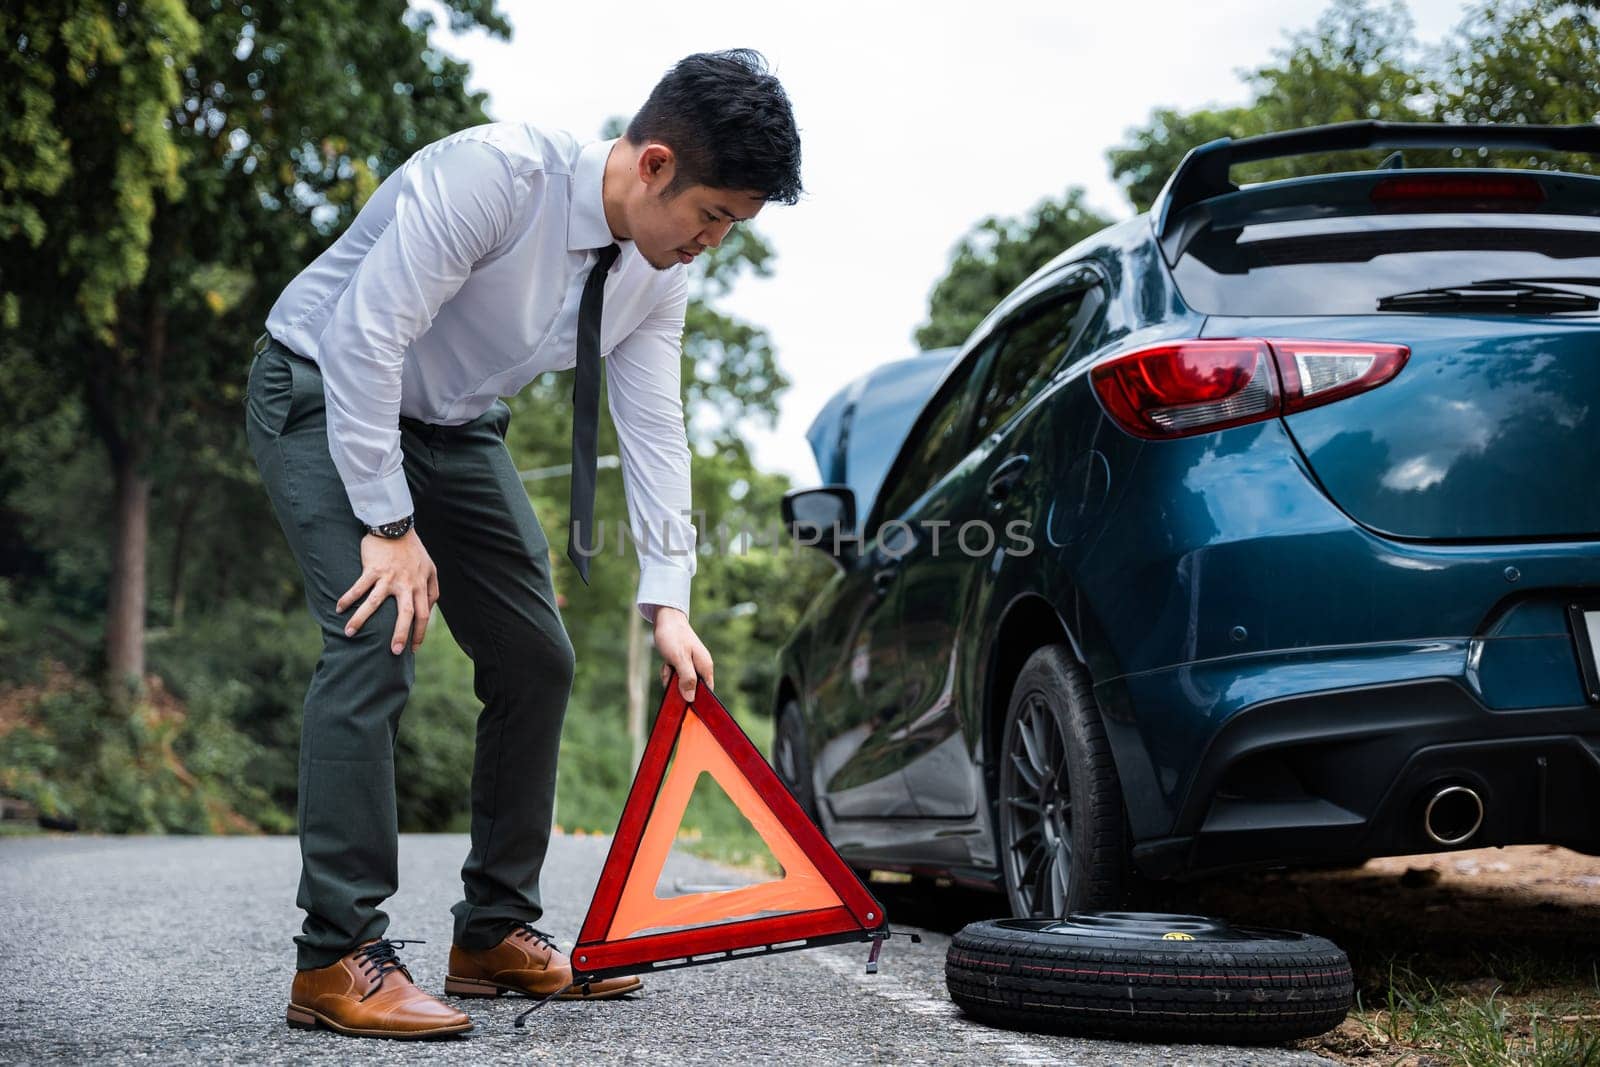 Man having car trouble and stranded at roadside with red warning triangle behind his broken car. Waiting for emergency assistance and transportation services.